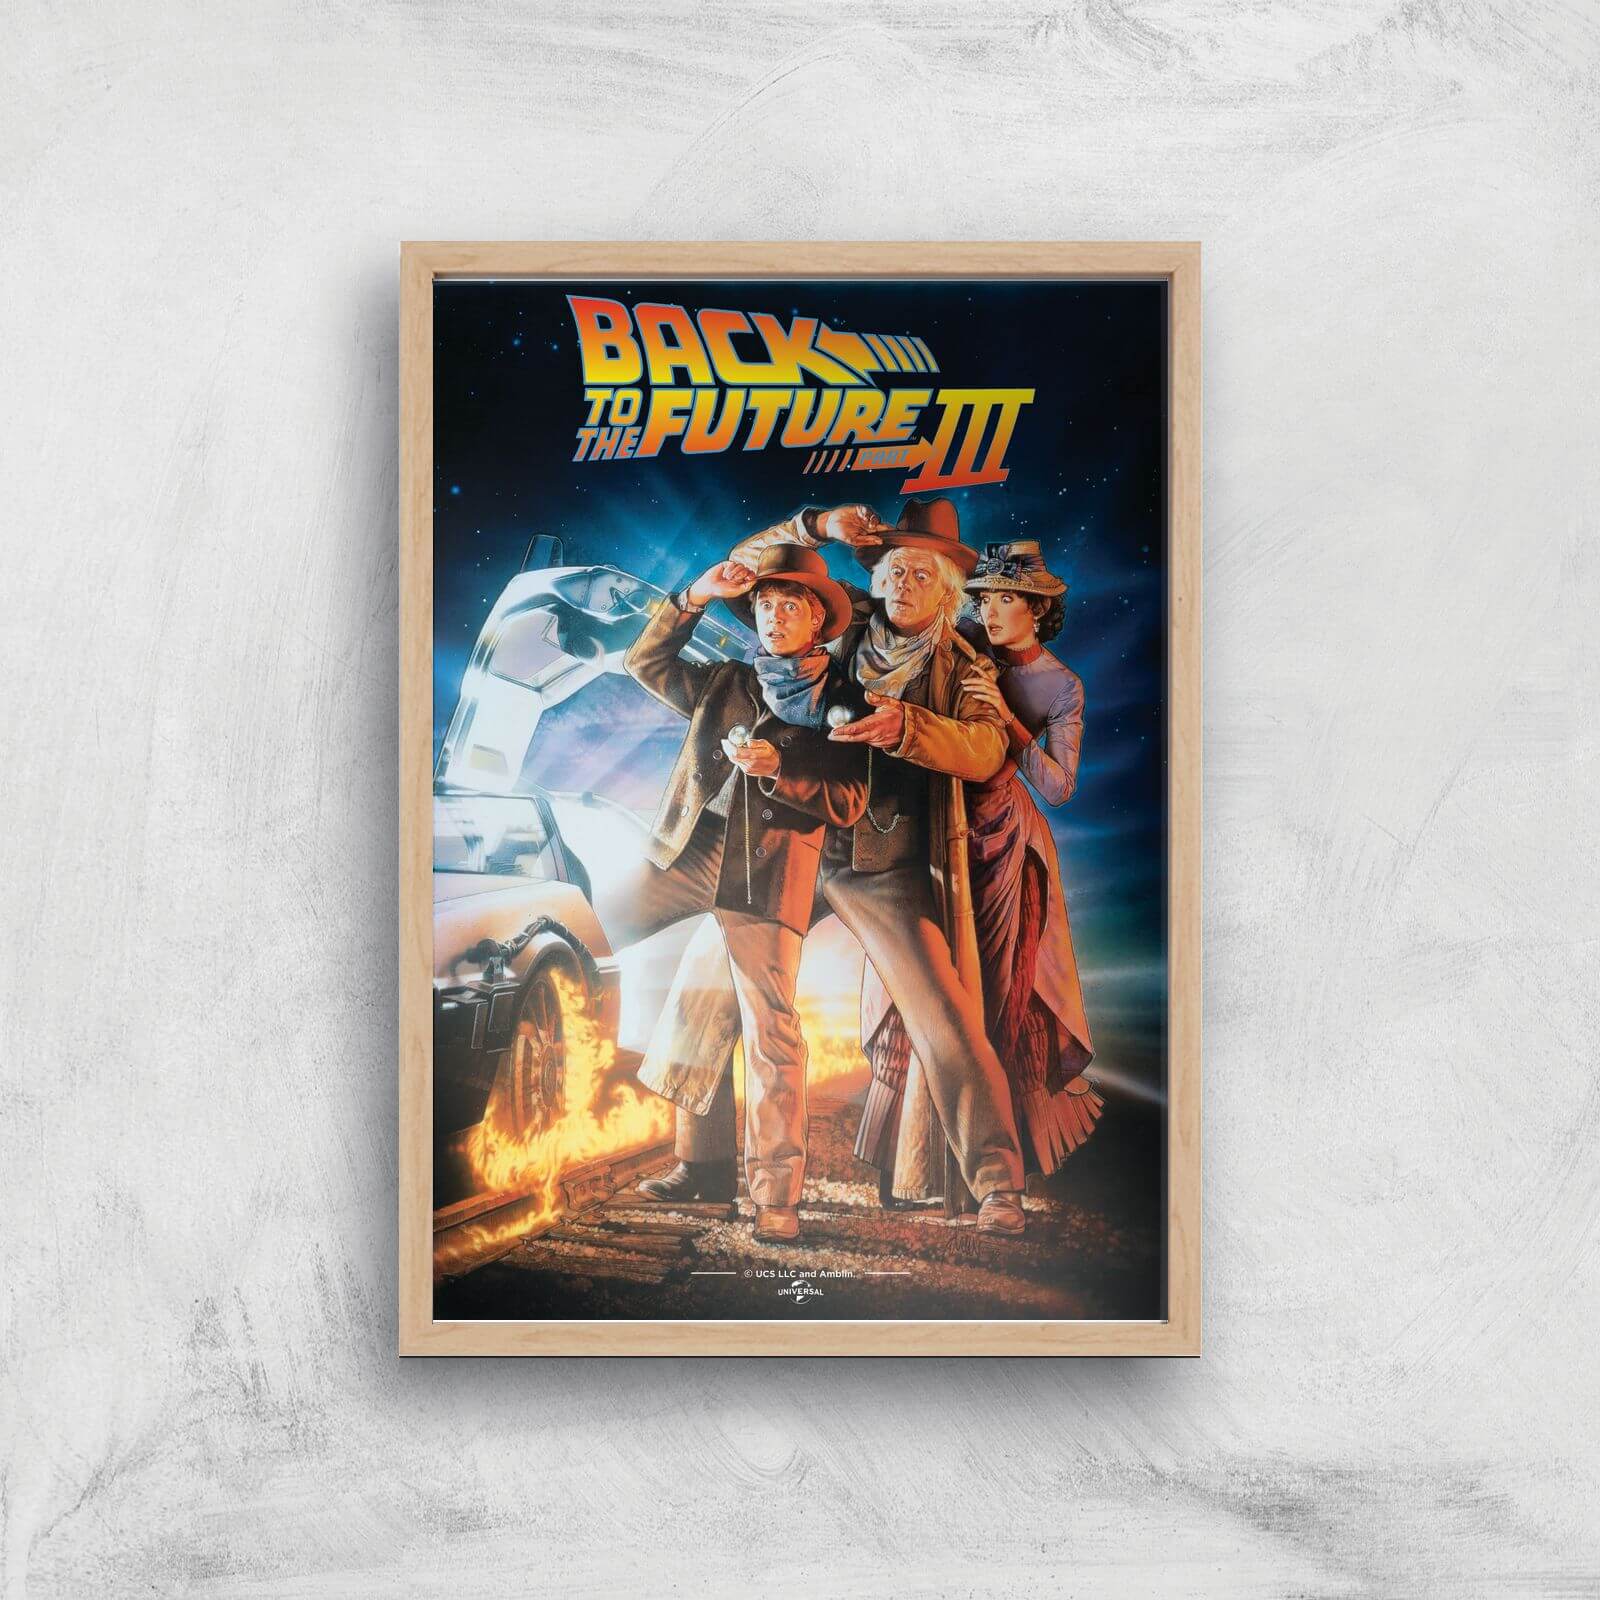 Back To The Future Part 3 Giclee Art Print - A3 - Wooden Frame